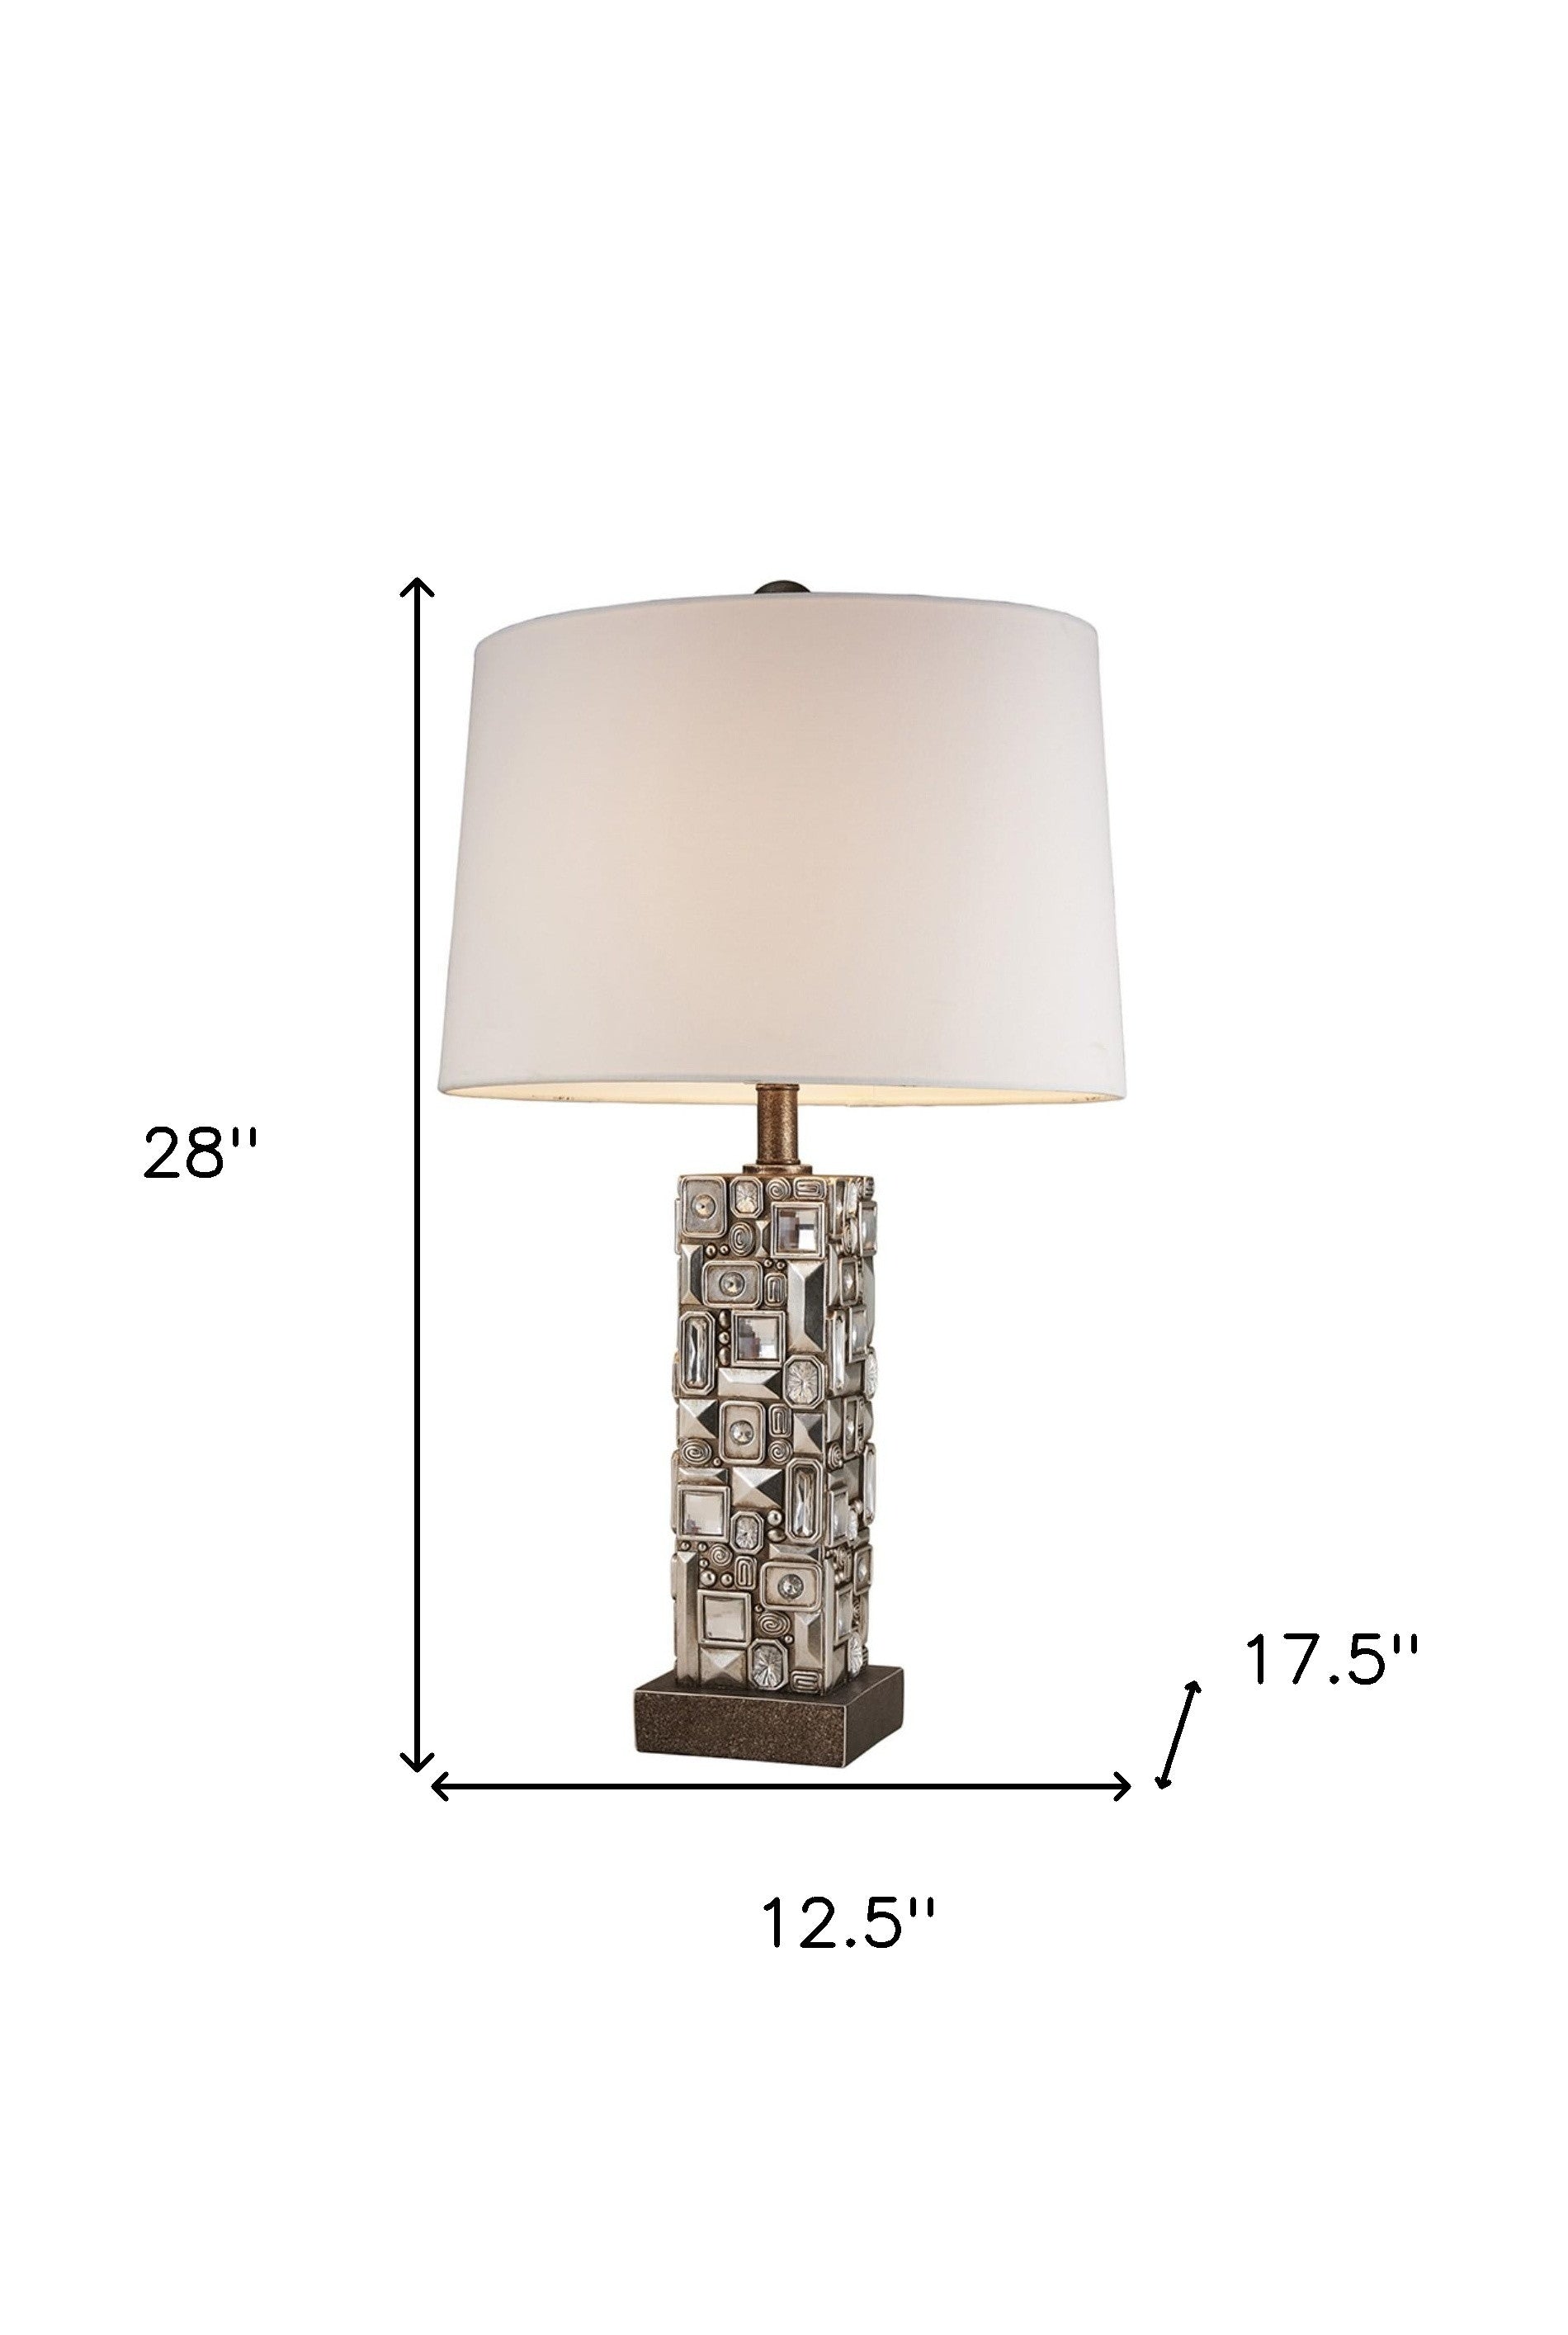 Silver Table Lamp with Abstract Mirror Design